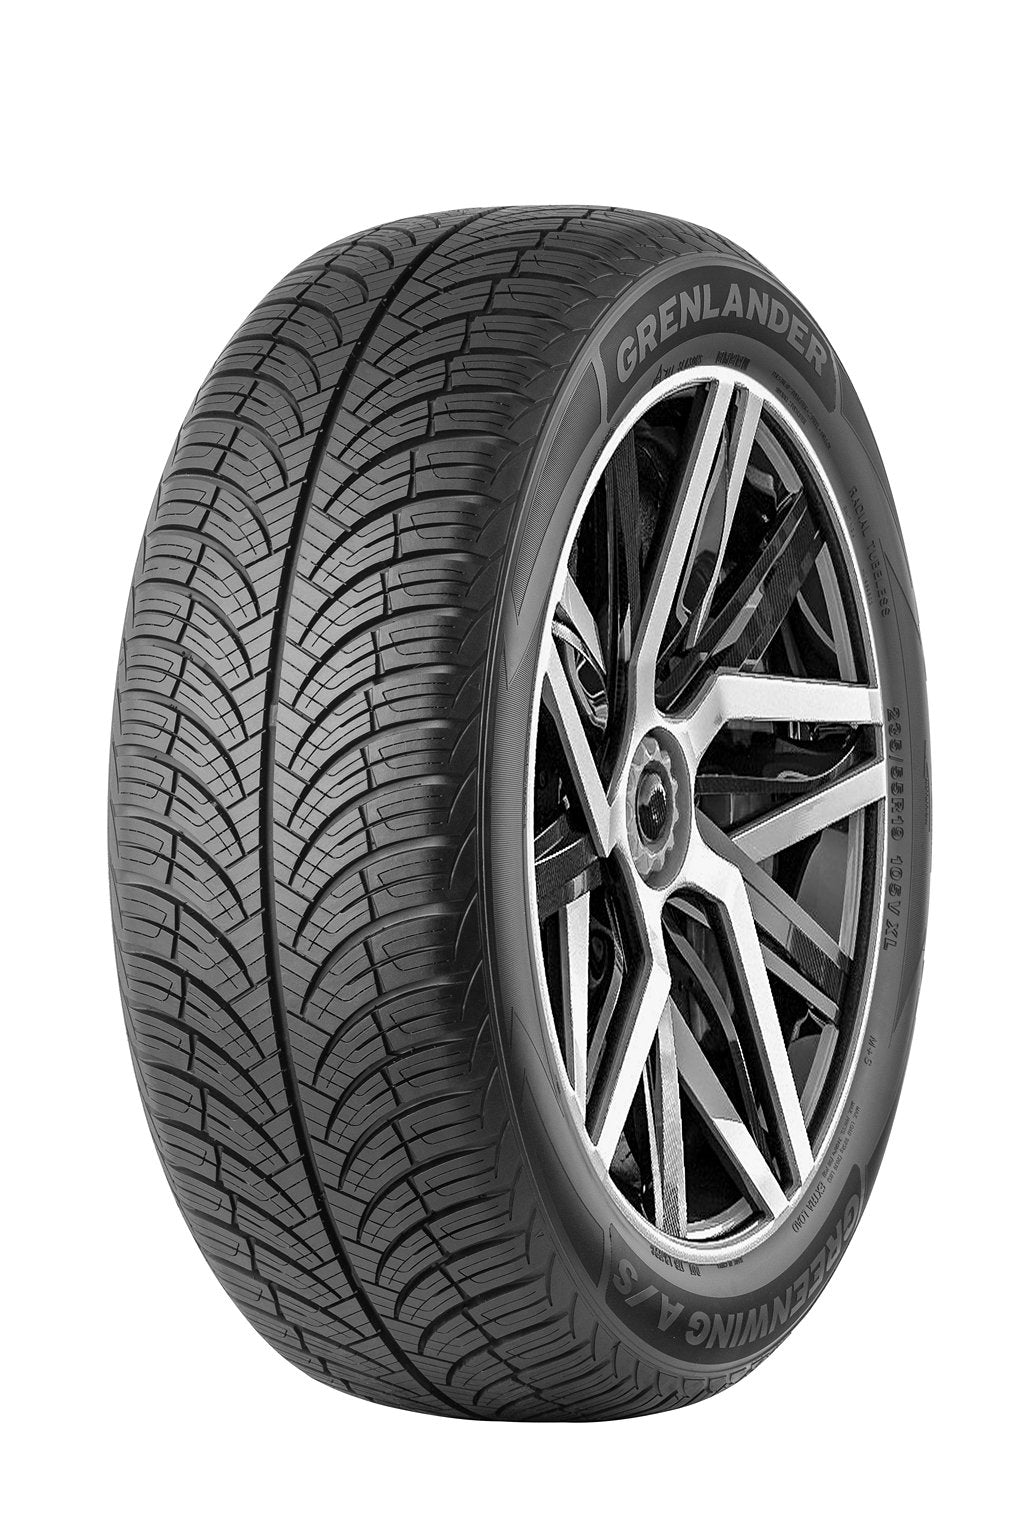 235/60R18 GRENLANDER FRONWING A/S ALL WEATHER - Toee Tire